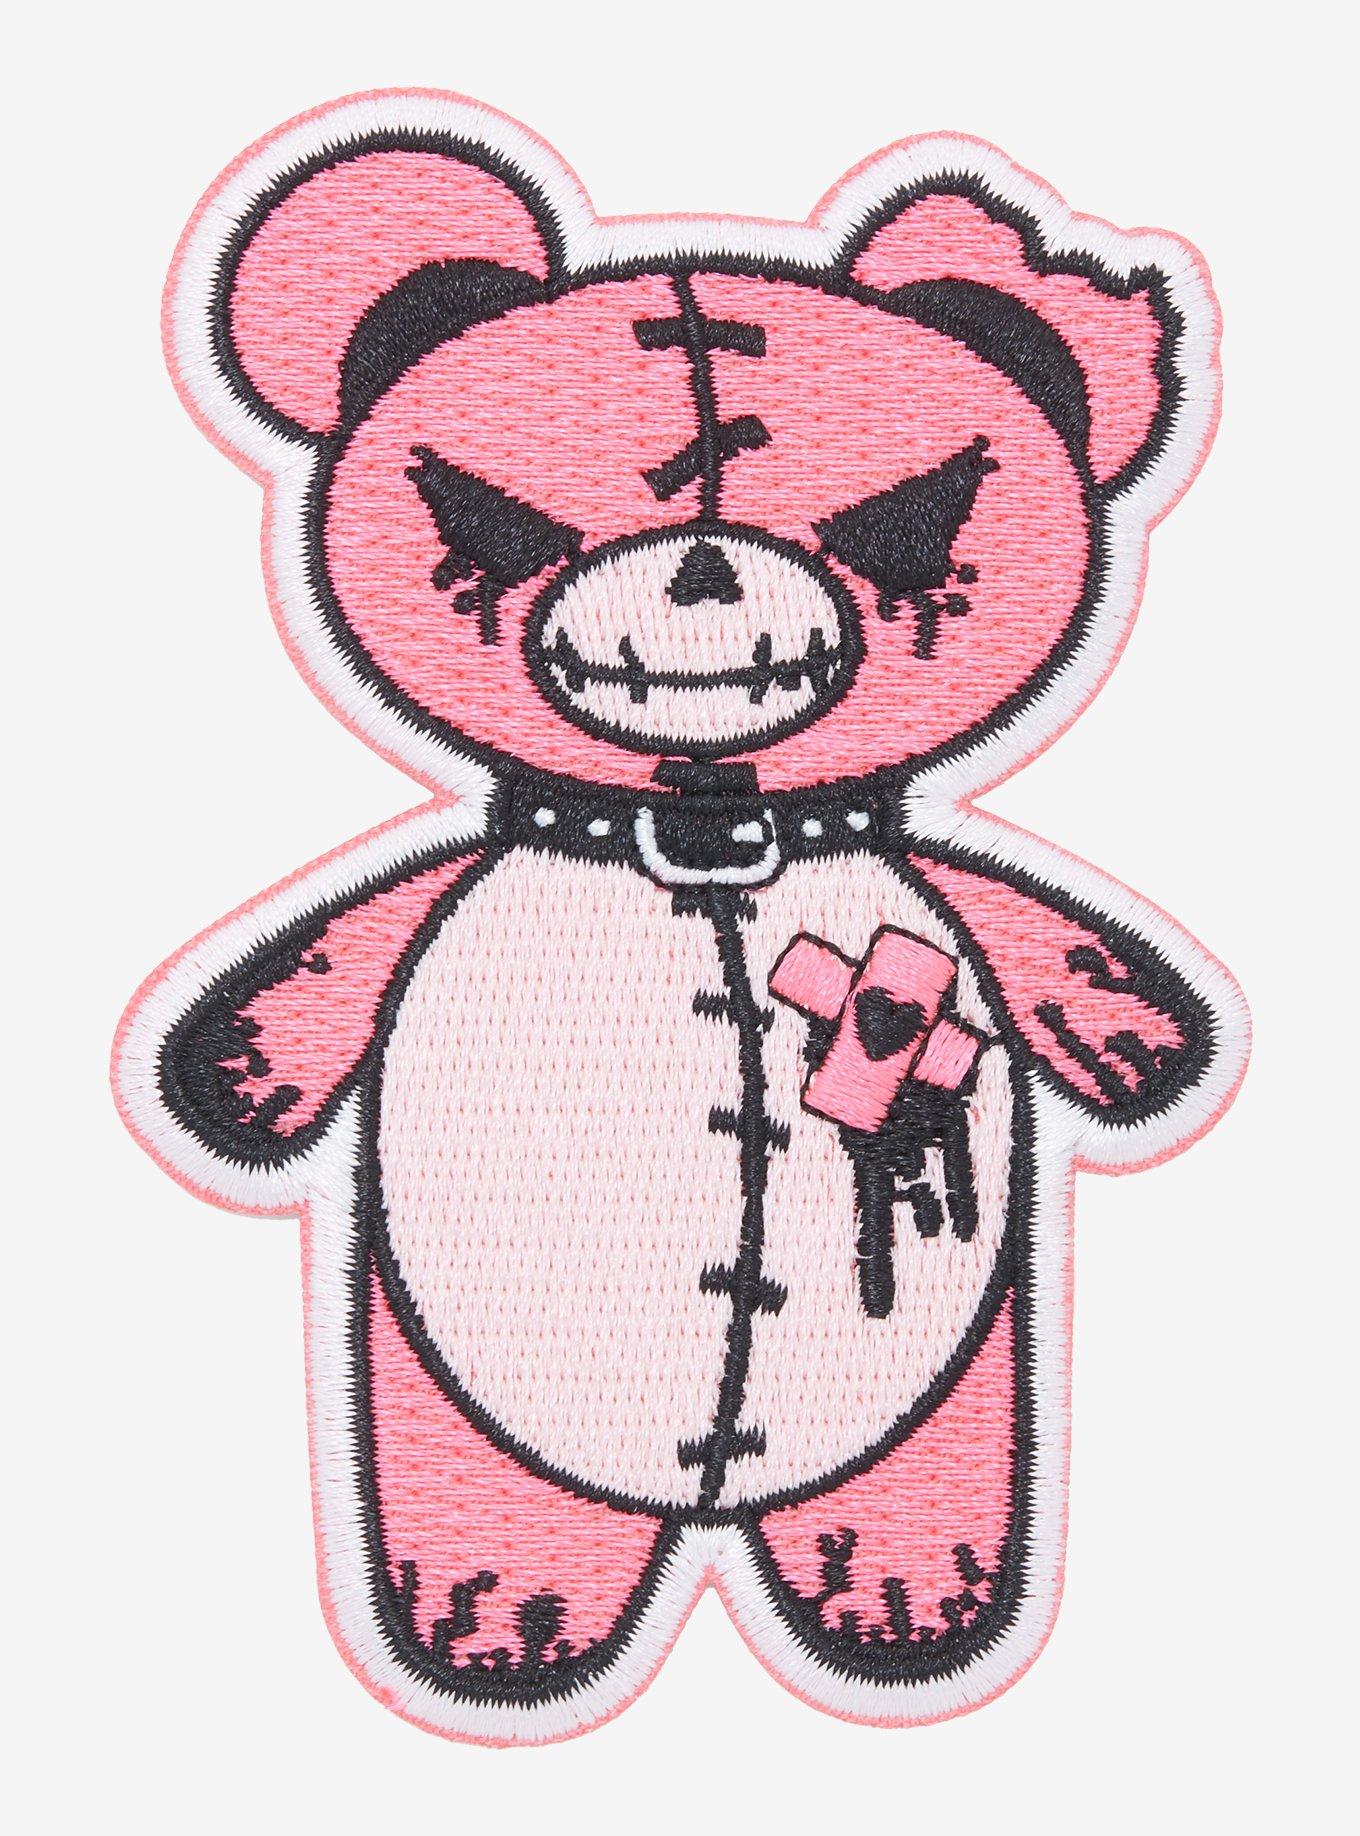 Don't Be A, Anime Patches, Anime Style, Punk, Patches, Patch, Sew on Patch,  Punk Accessories, Punk Patches, horror anime patch, kawaii plush